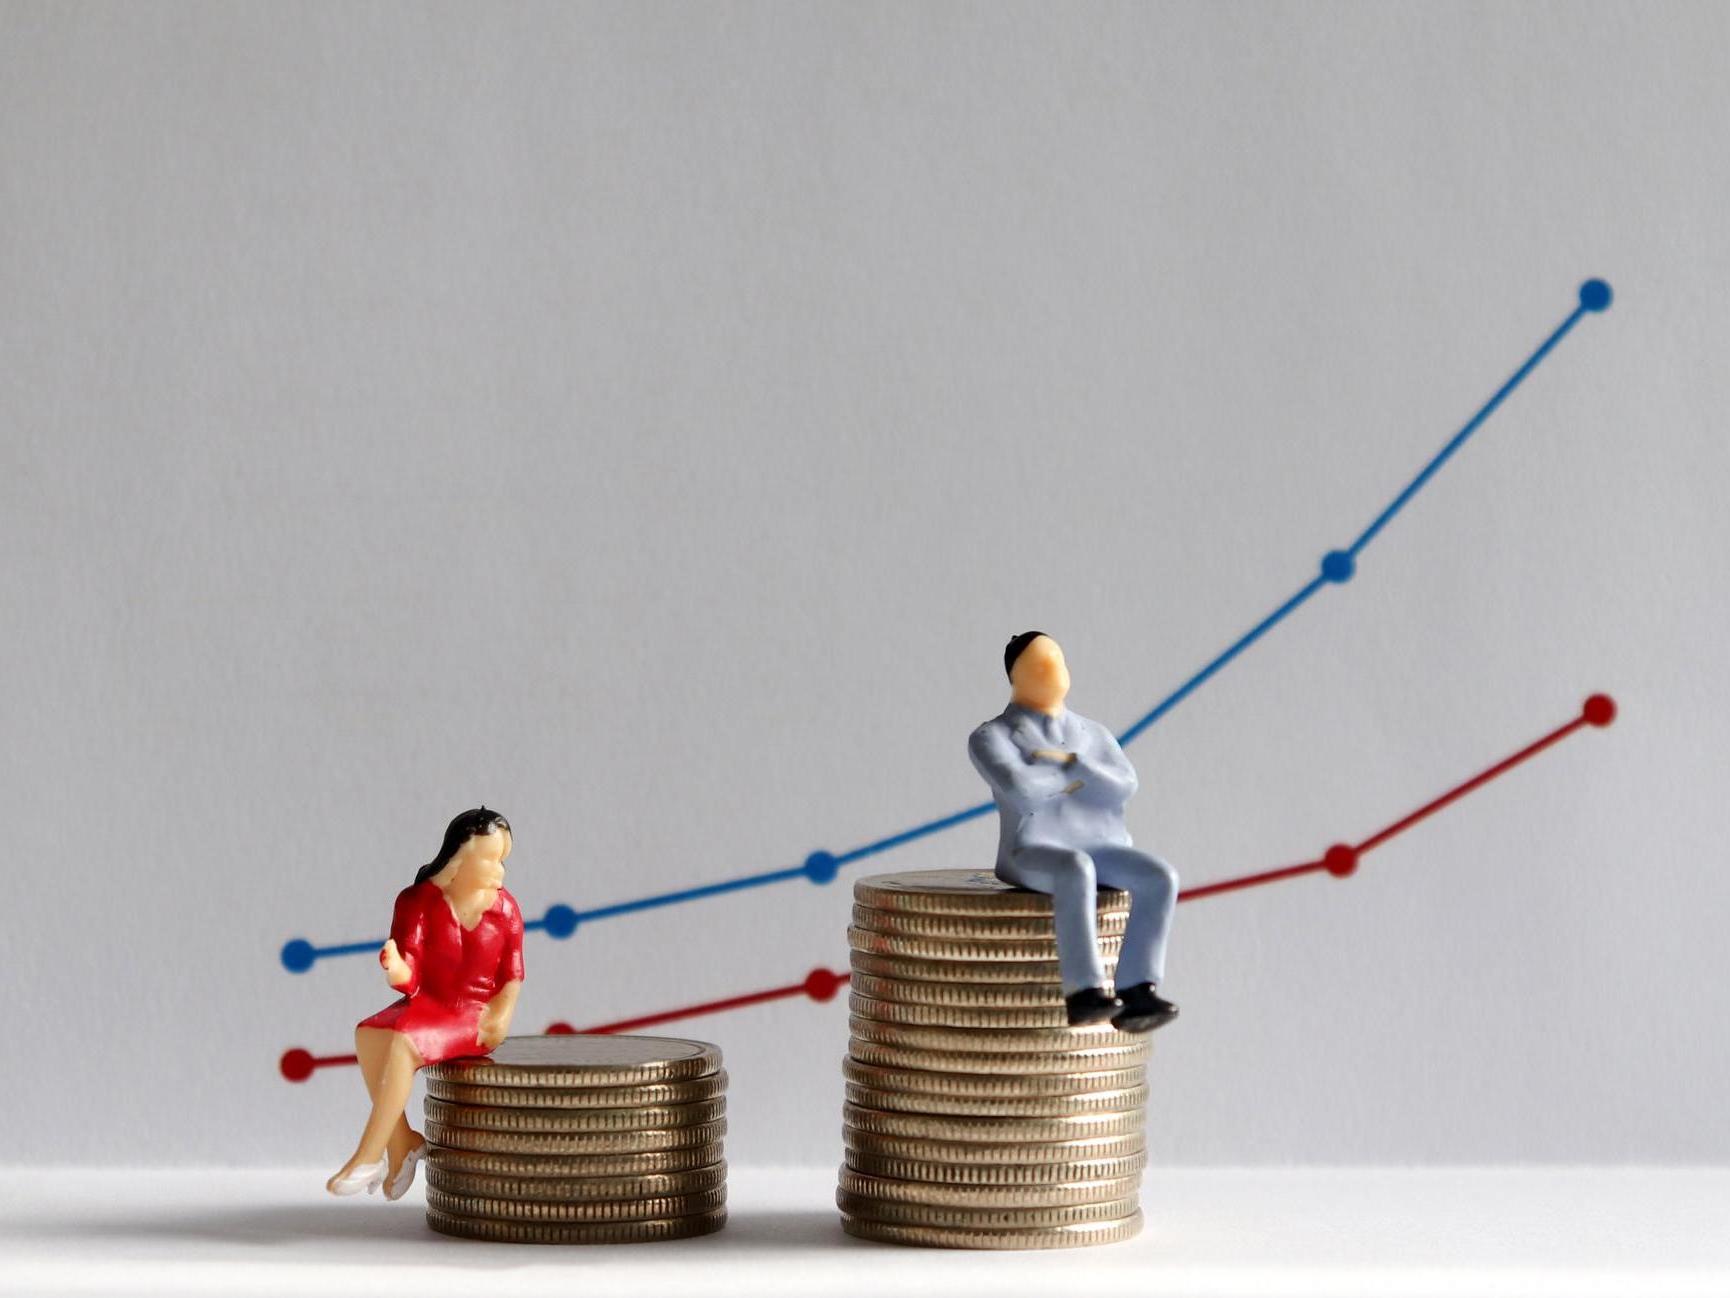 The gender pay gap is still yawning